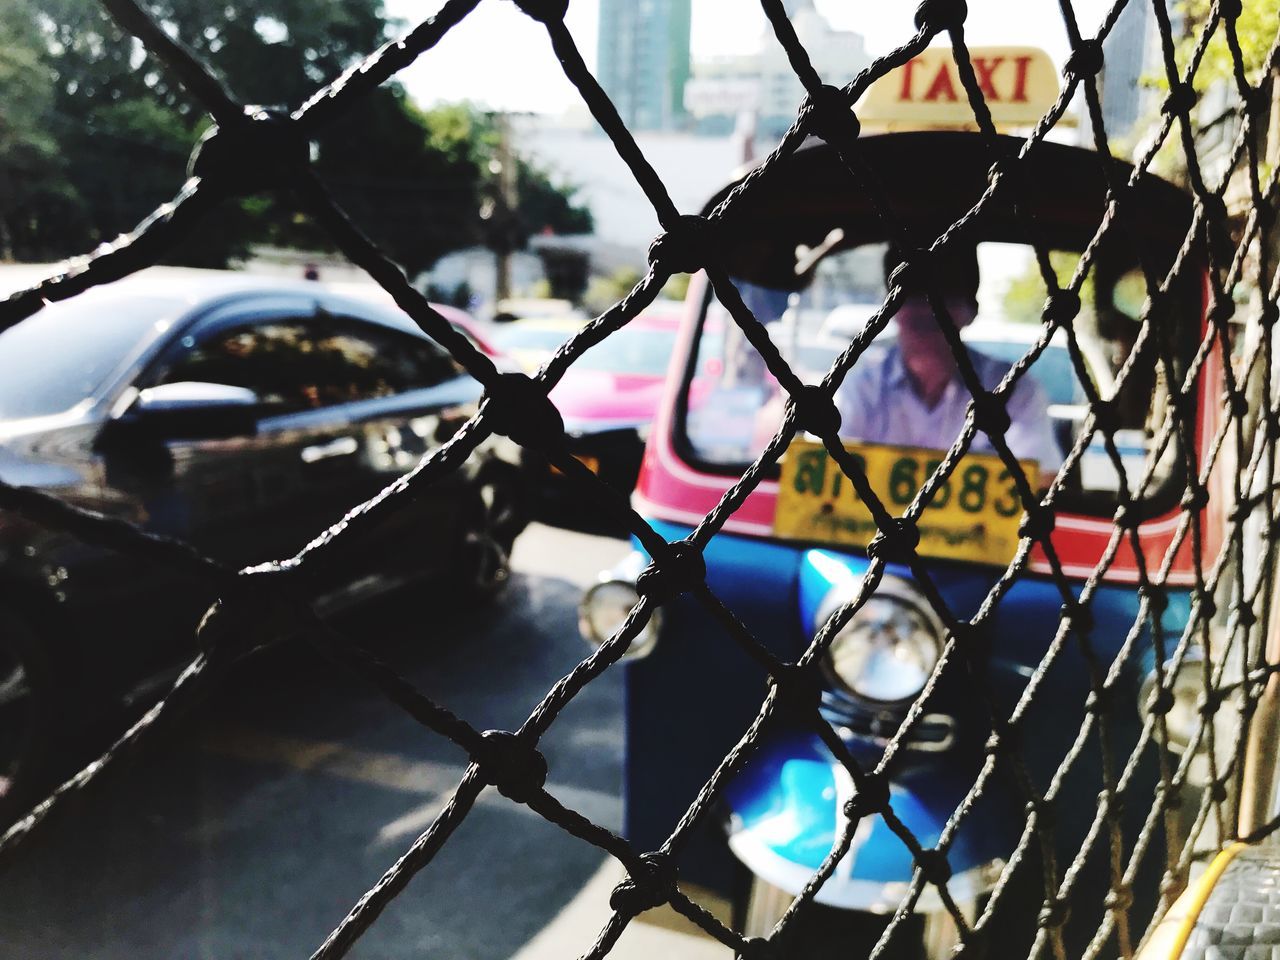 FULL FRAME SHOT OF CHAINLINK FENCE WITH CAR